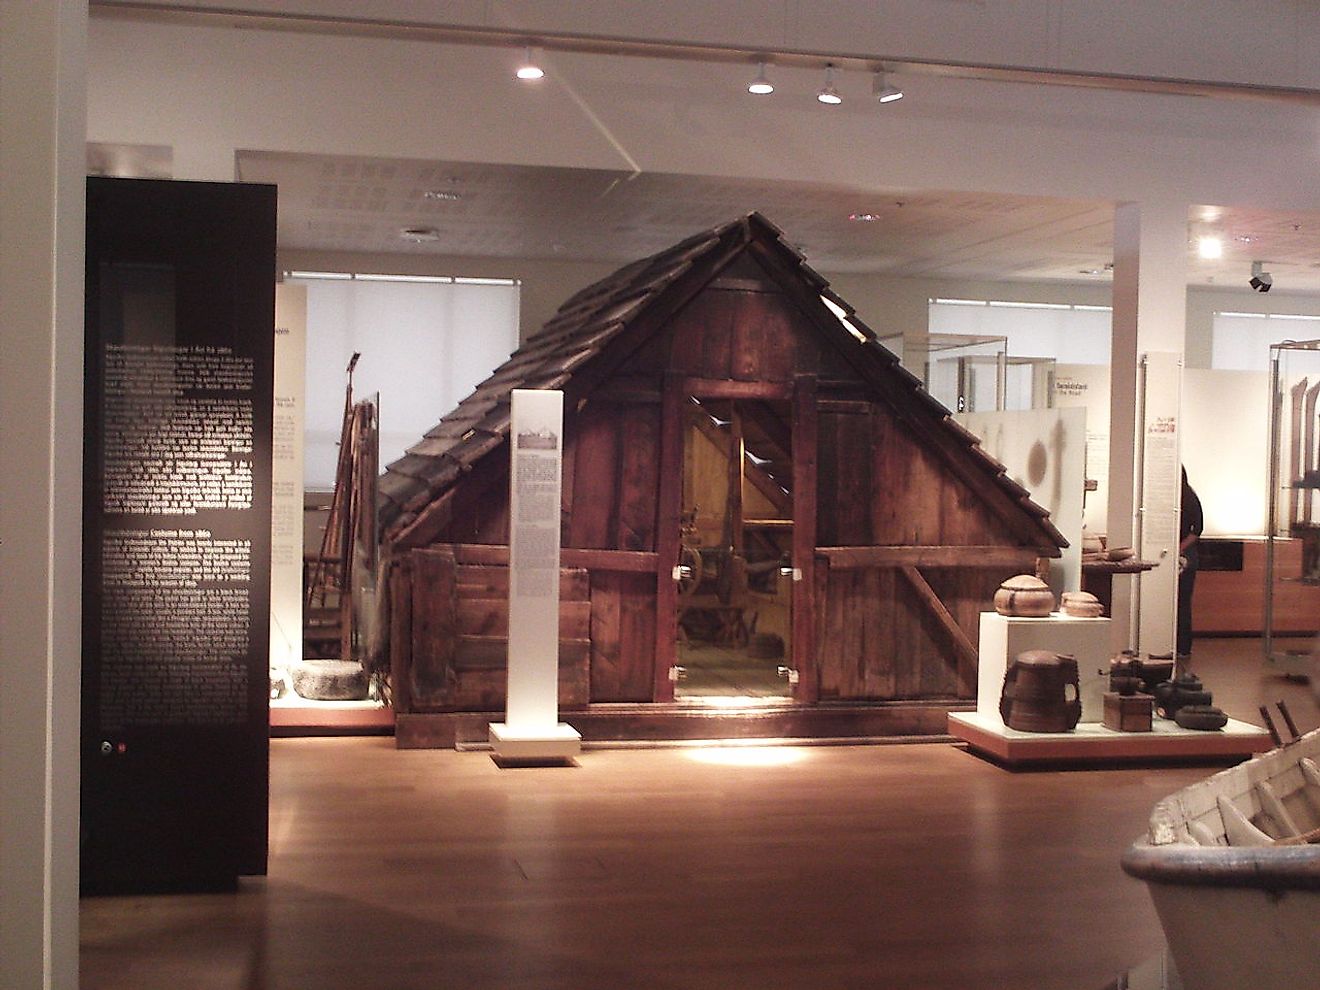 Traditional house inside the National Museum of Iceland. Image credit: Ypsilon/Wikimedia.org